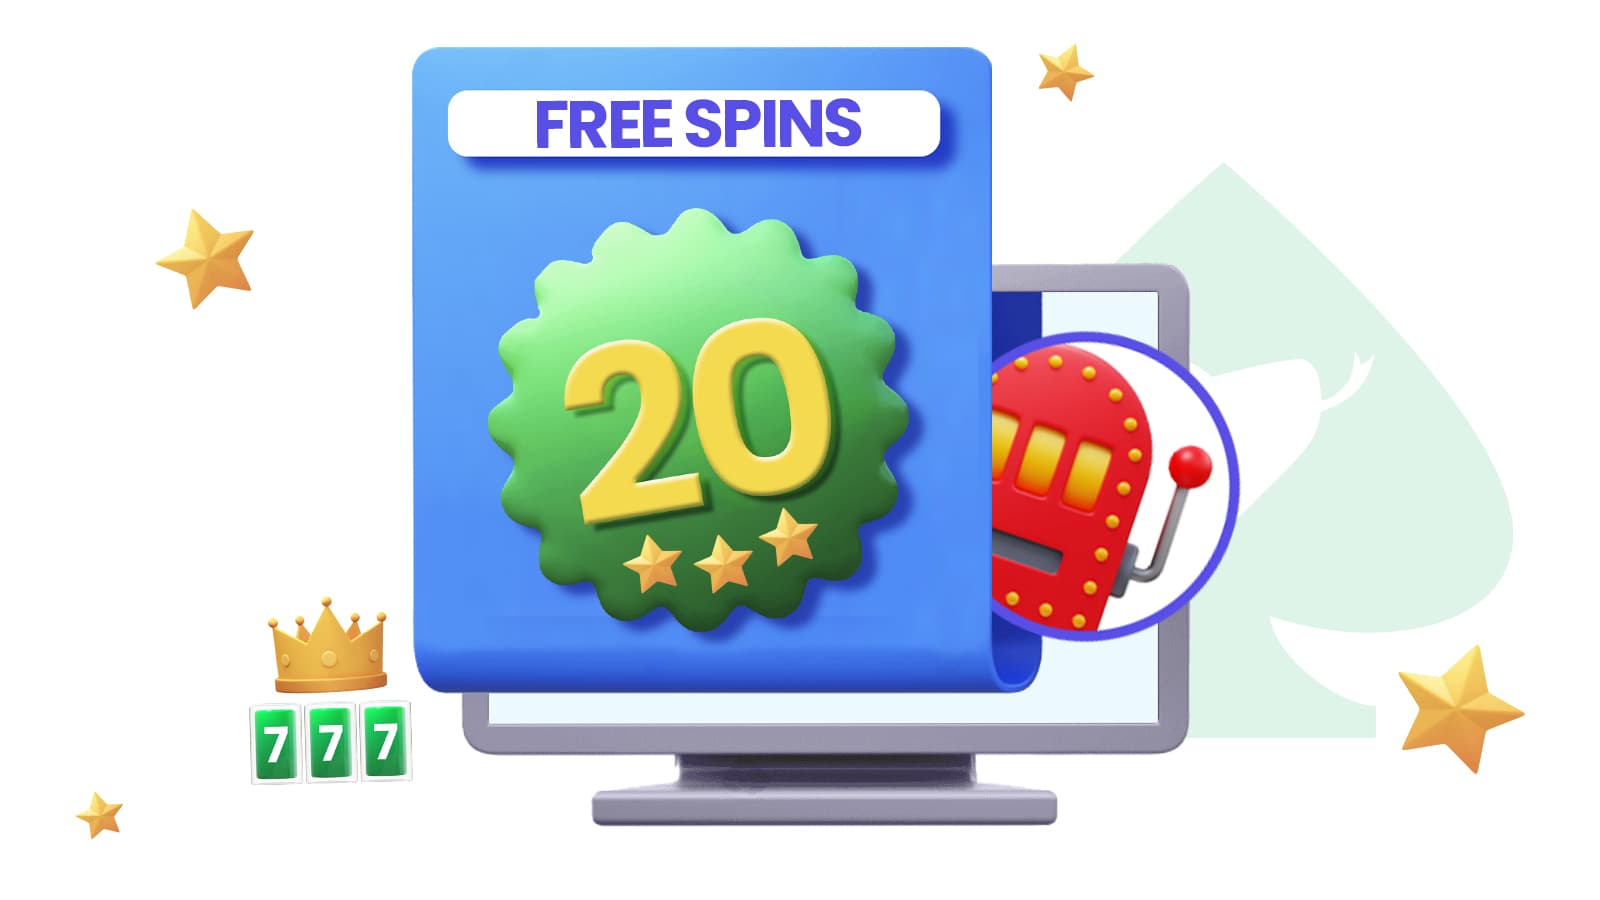 20 free spins terms and conditions